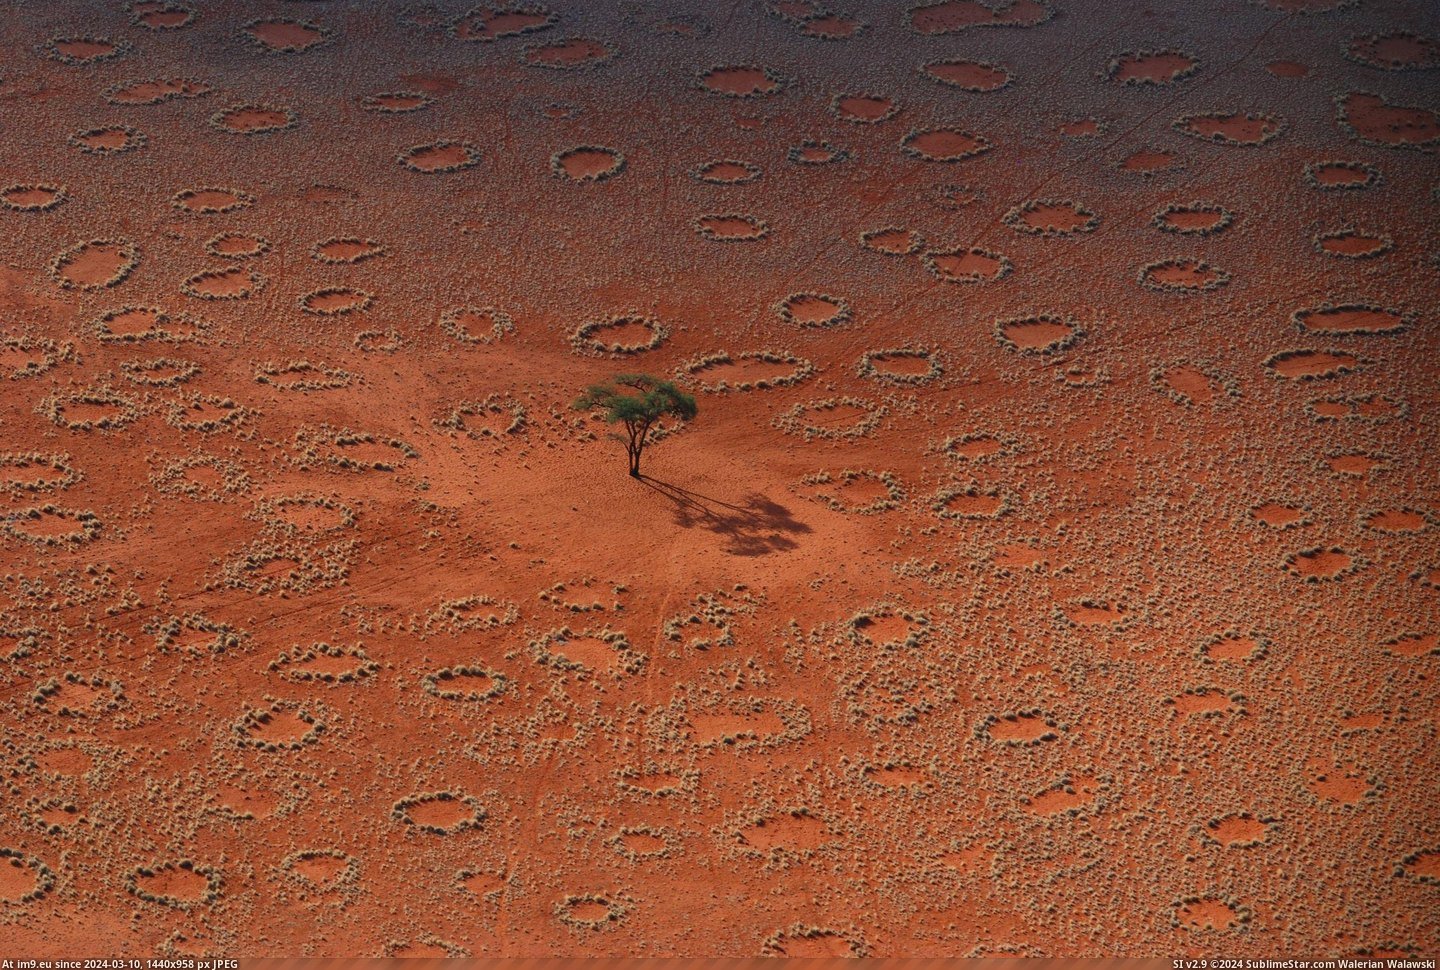 #Tree #Mysterious #Lone #Namibia #Circles #Fairy #Stands [Earthporn] A lone tree stands among the mysterious Fairy Circles of Namibia - [2600x1741] Pic. (Bild von album My r/EARTHPORN favs))